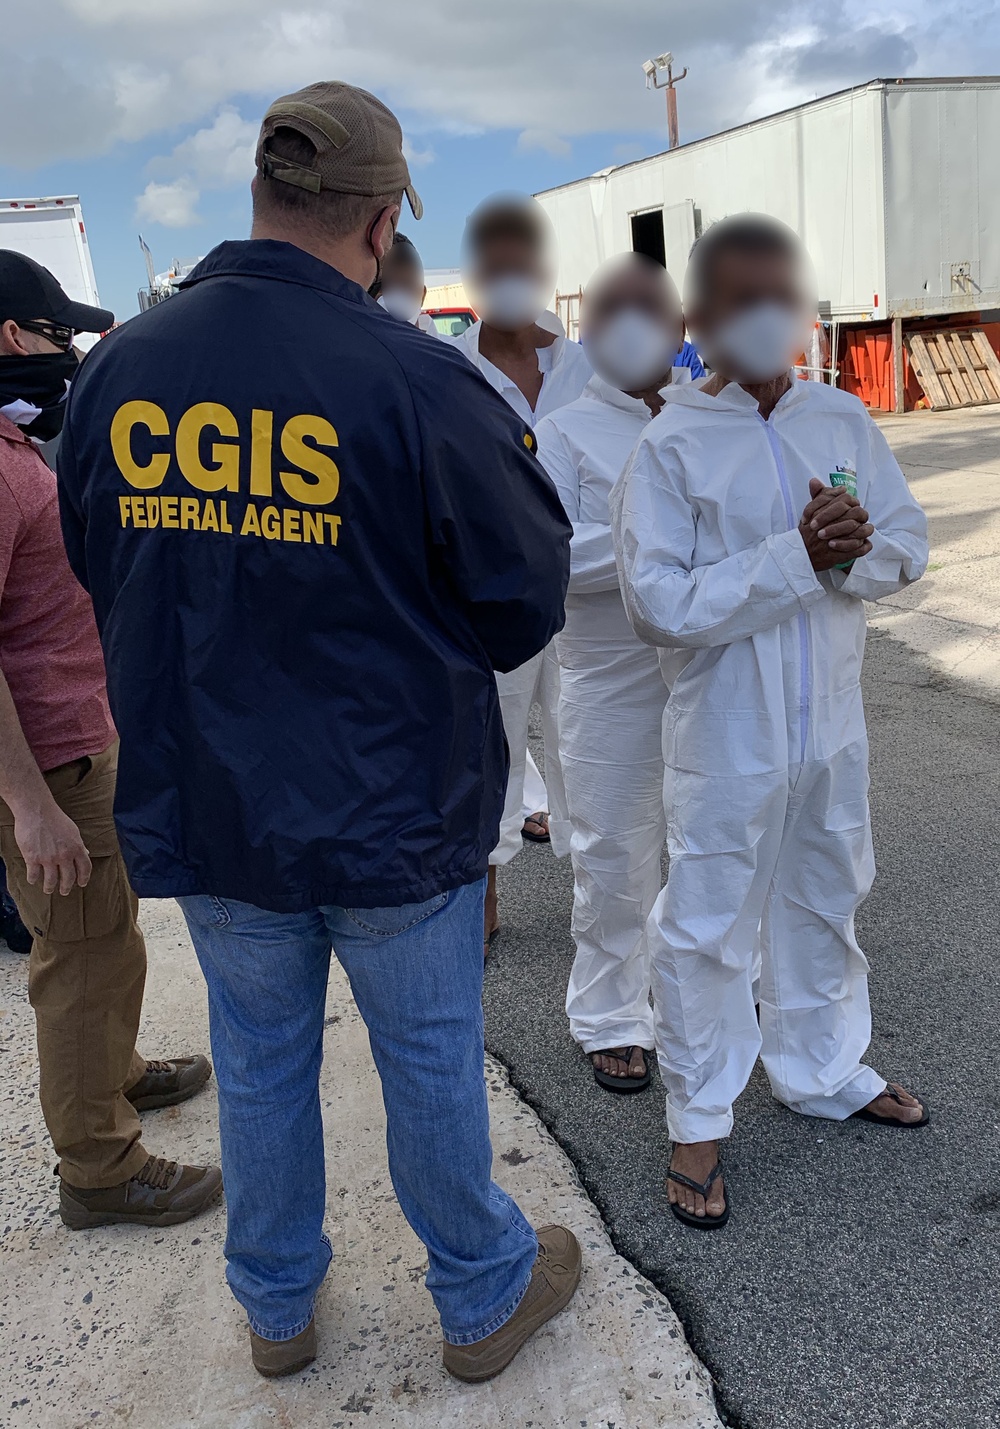 DVIDS - Images - Coast Guard transfers 6.8 million in seized cocaine, 4  suspected smugglers to federal agents in San Juan, Puerto Rico [Image 2 of  4]